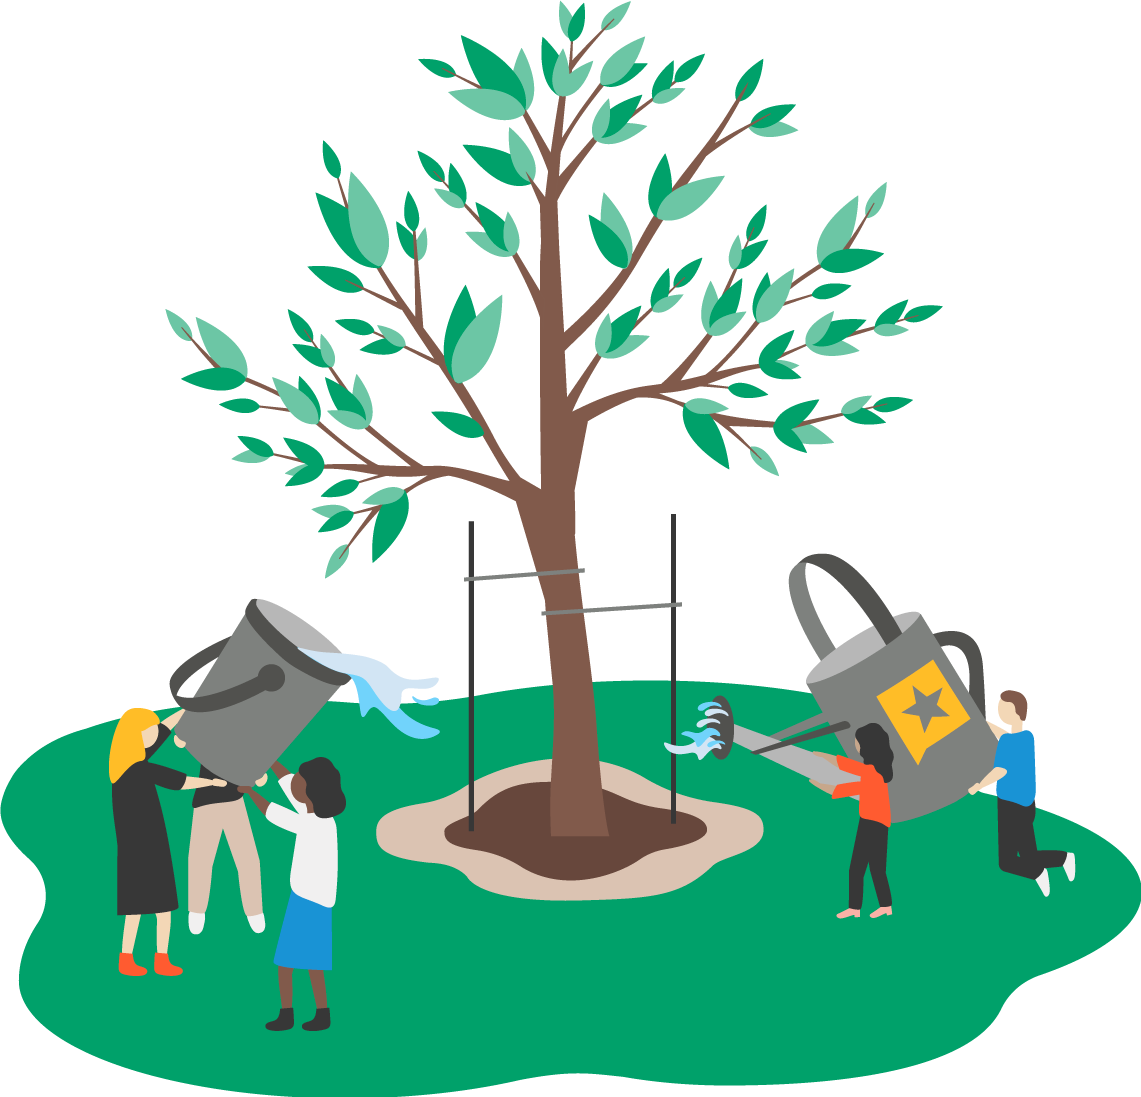 Illustration: People working together to water a tree.